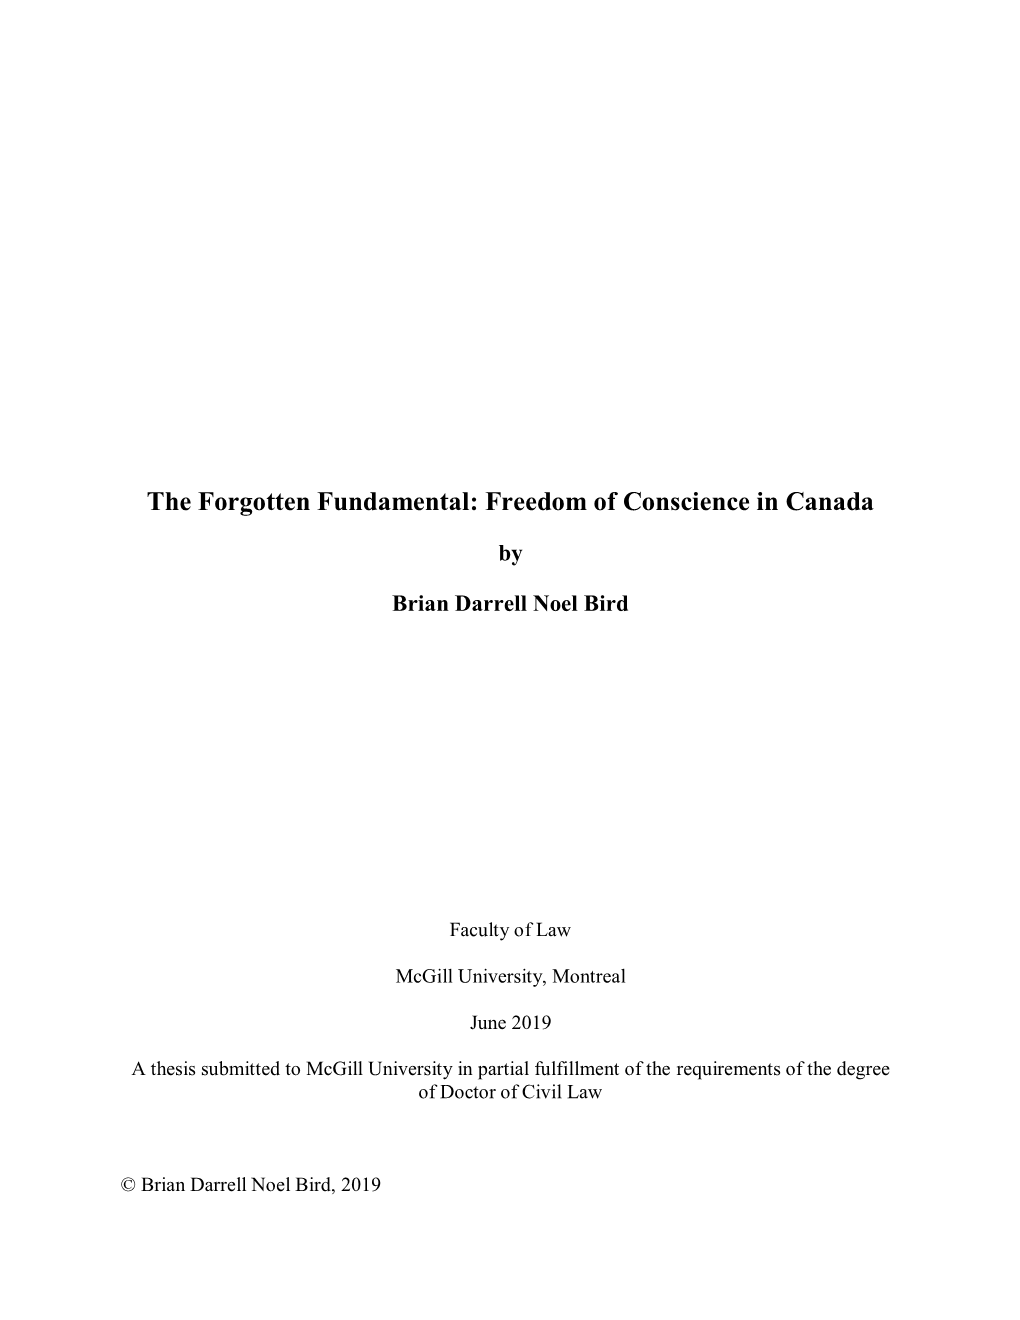 The Forgotten Fundamental: Freedom of Conscience in Canada